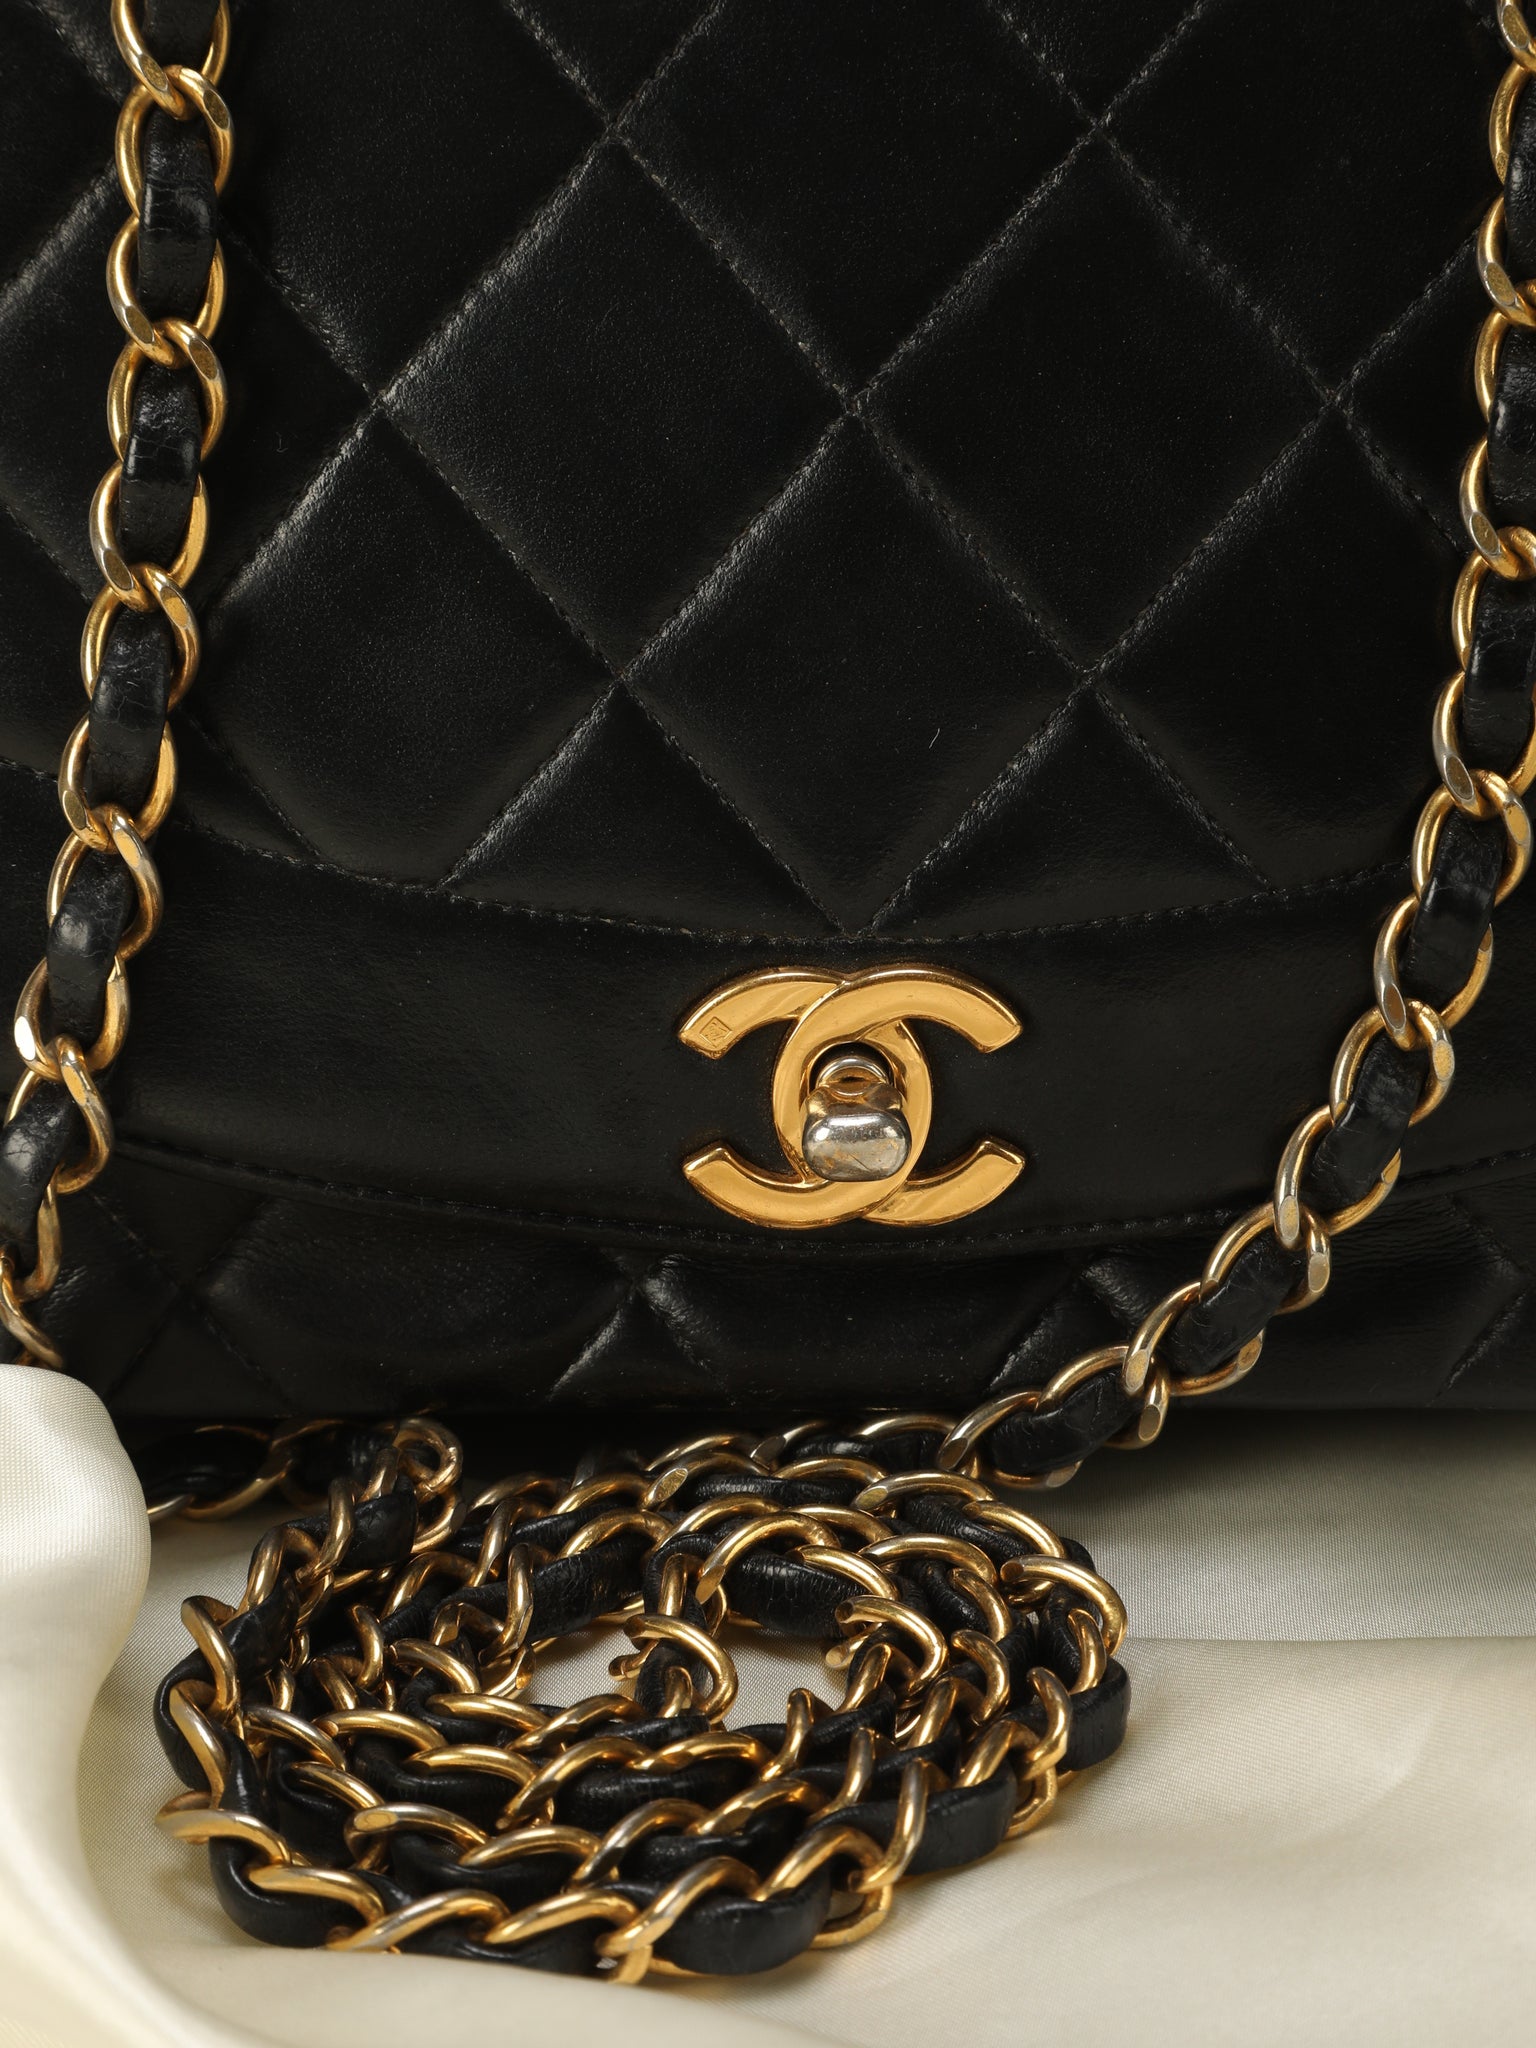 Vintage Chanel Small Diana Flap Bag White and Navy Lambskin Gold Hardware